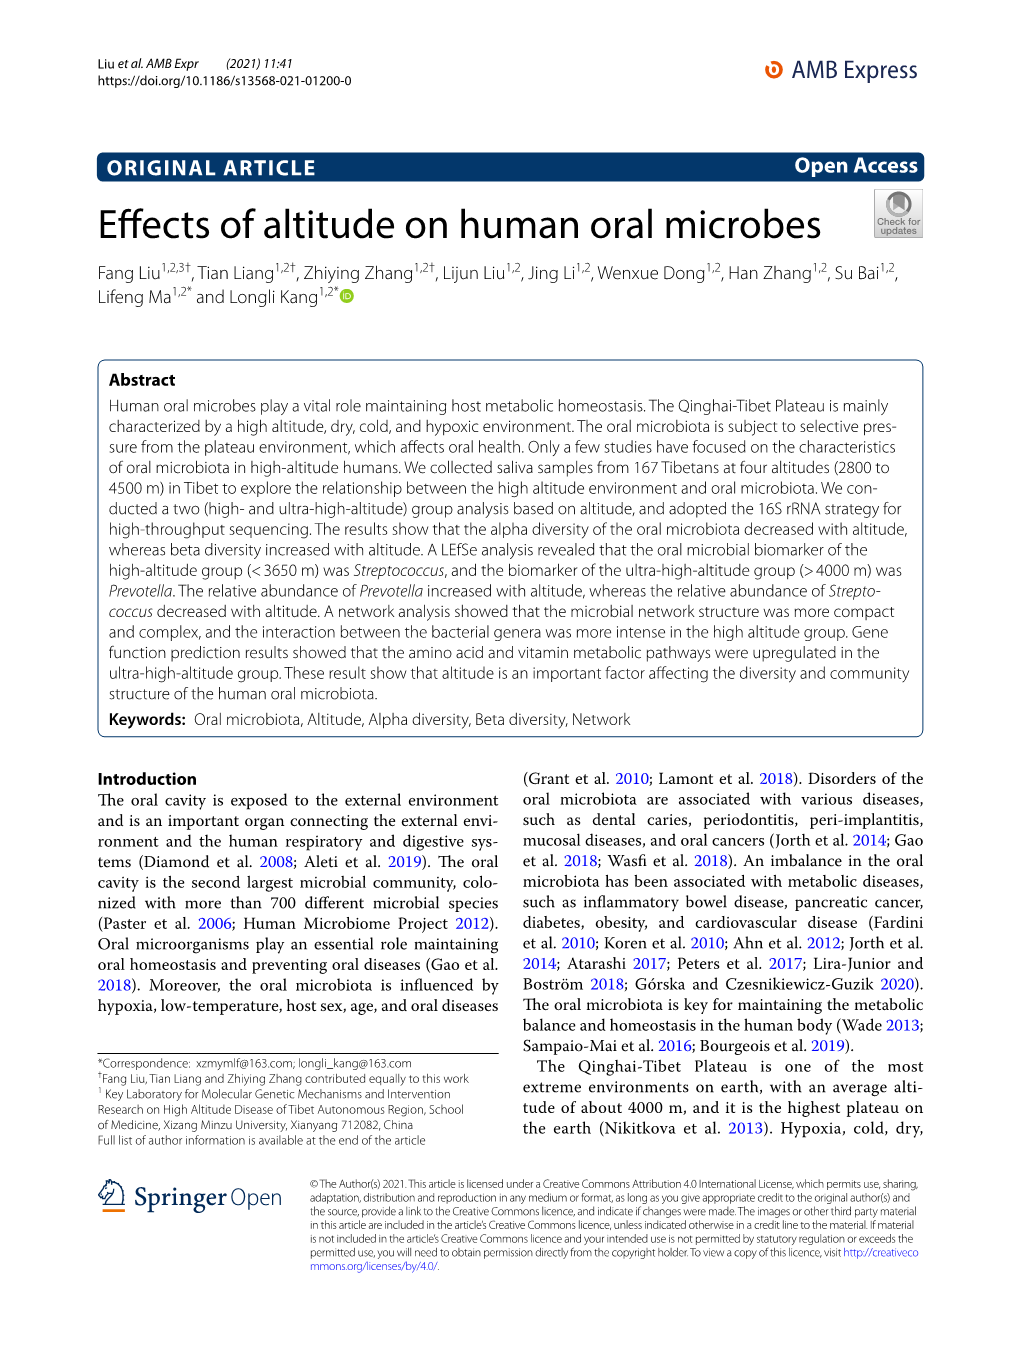 Effects of Altitude on Human Oral Microbes